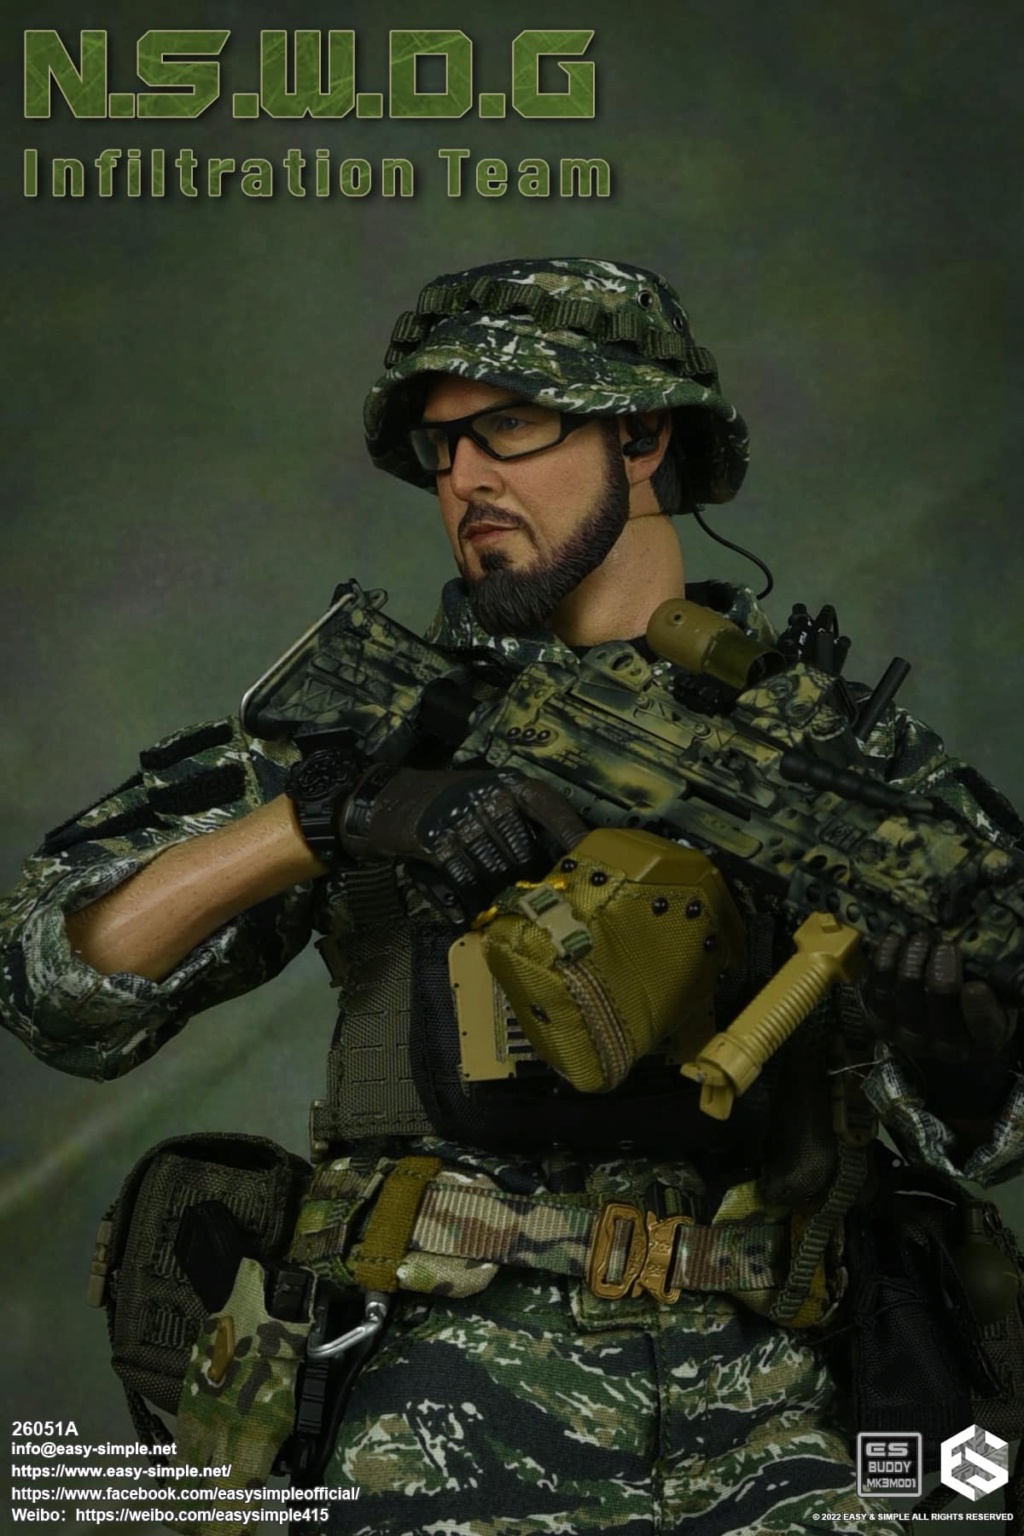 NEW PRODUCT: EASY AND SIMPLE 1/6 SCALE FIGURE: N.S.W.D.G INFILTRATION TEAM - (2 Versions) 11854